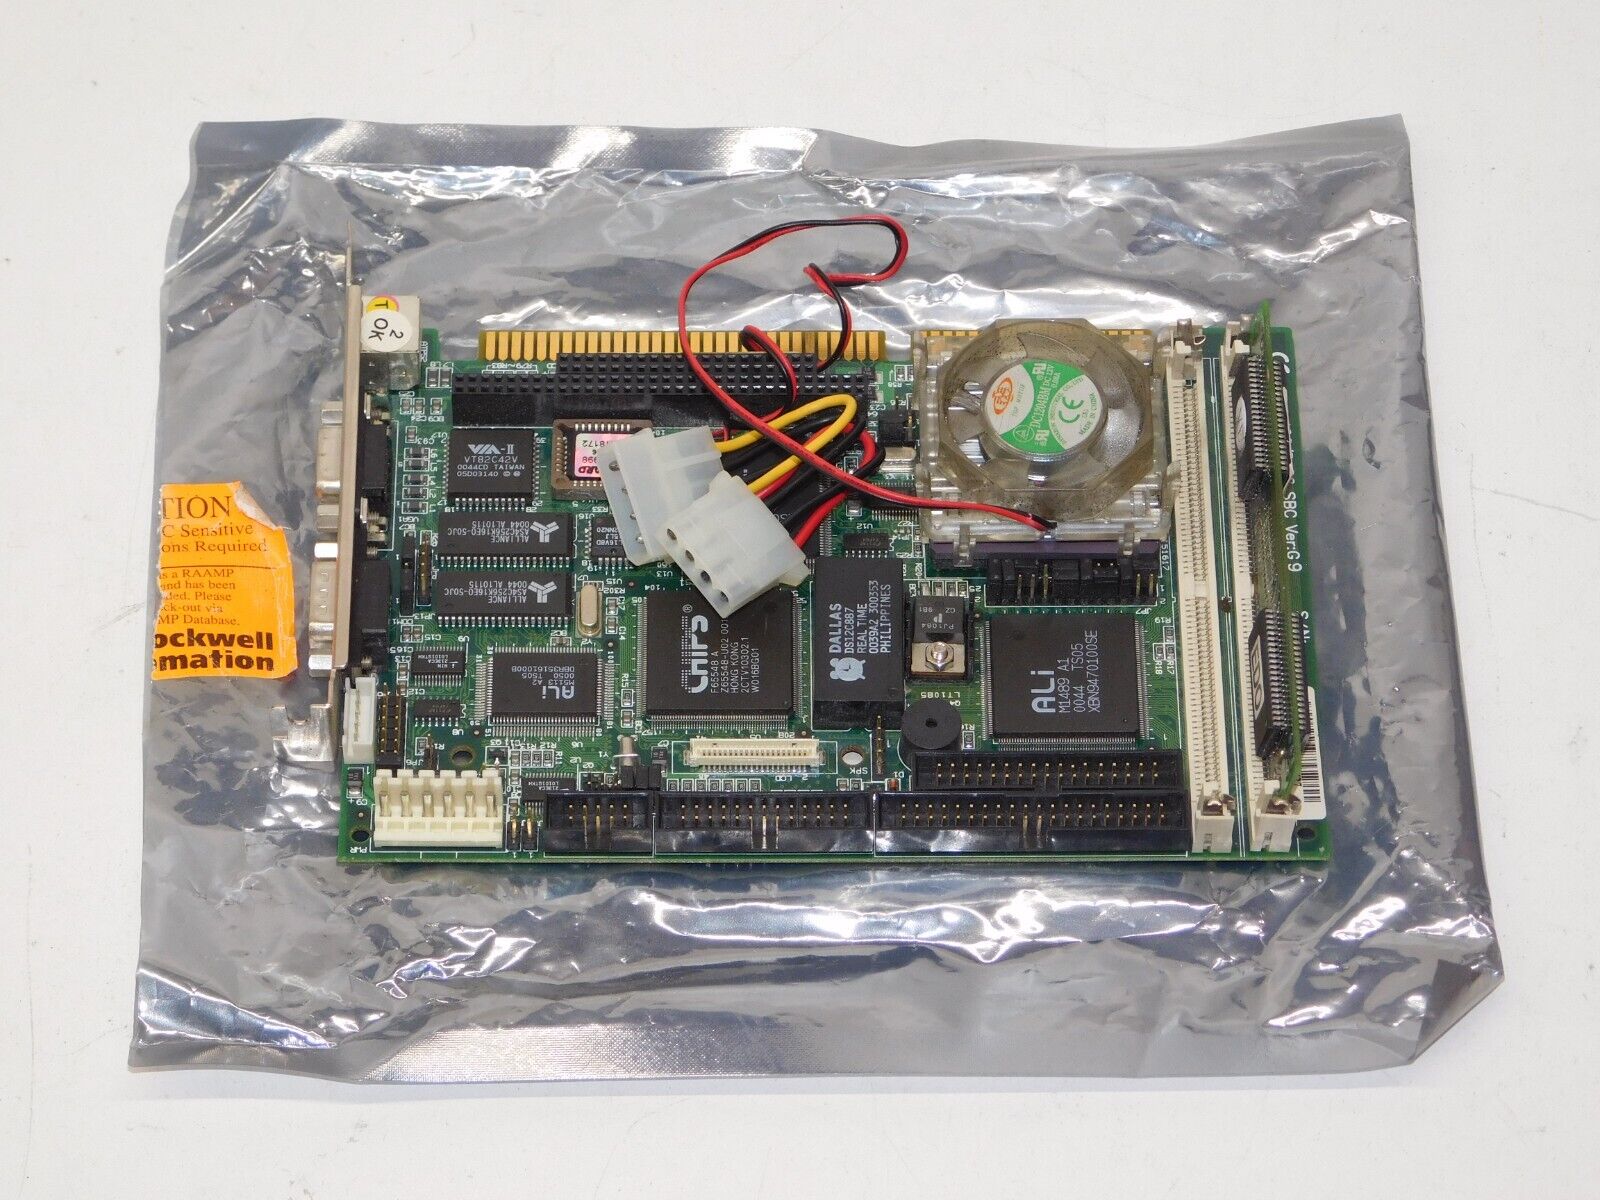 New Arbor Tech 486/5X86 Industrial Computer Mother Board Module Card Intel DX4